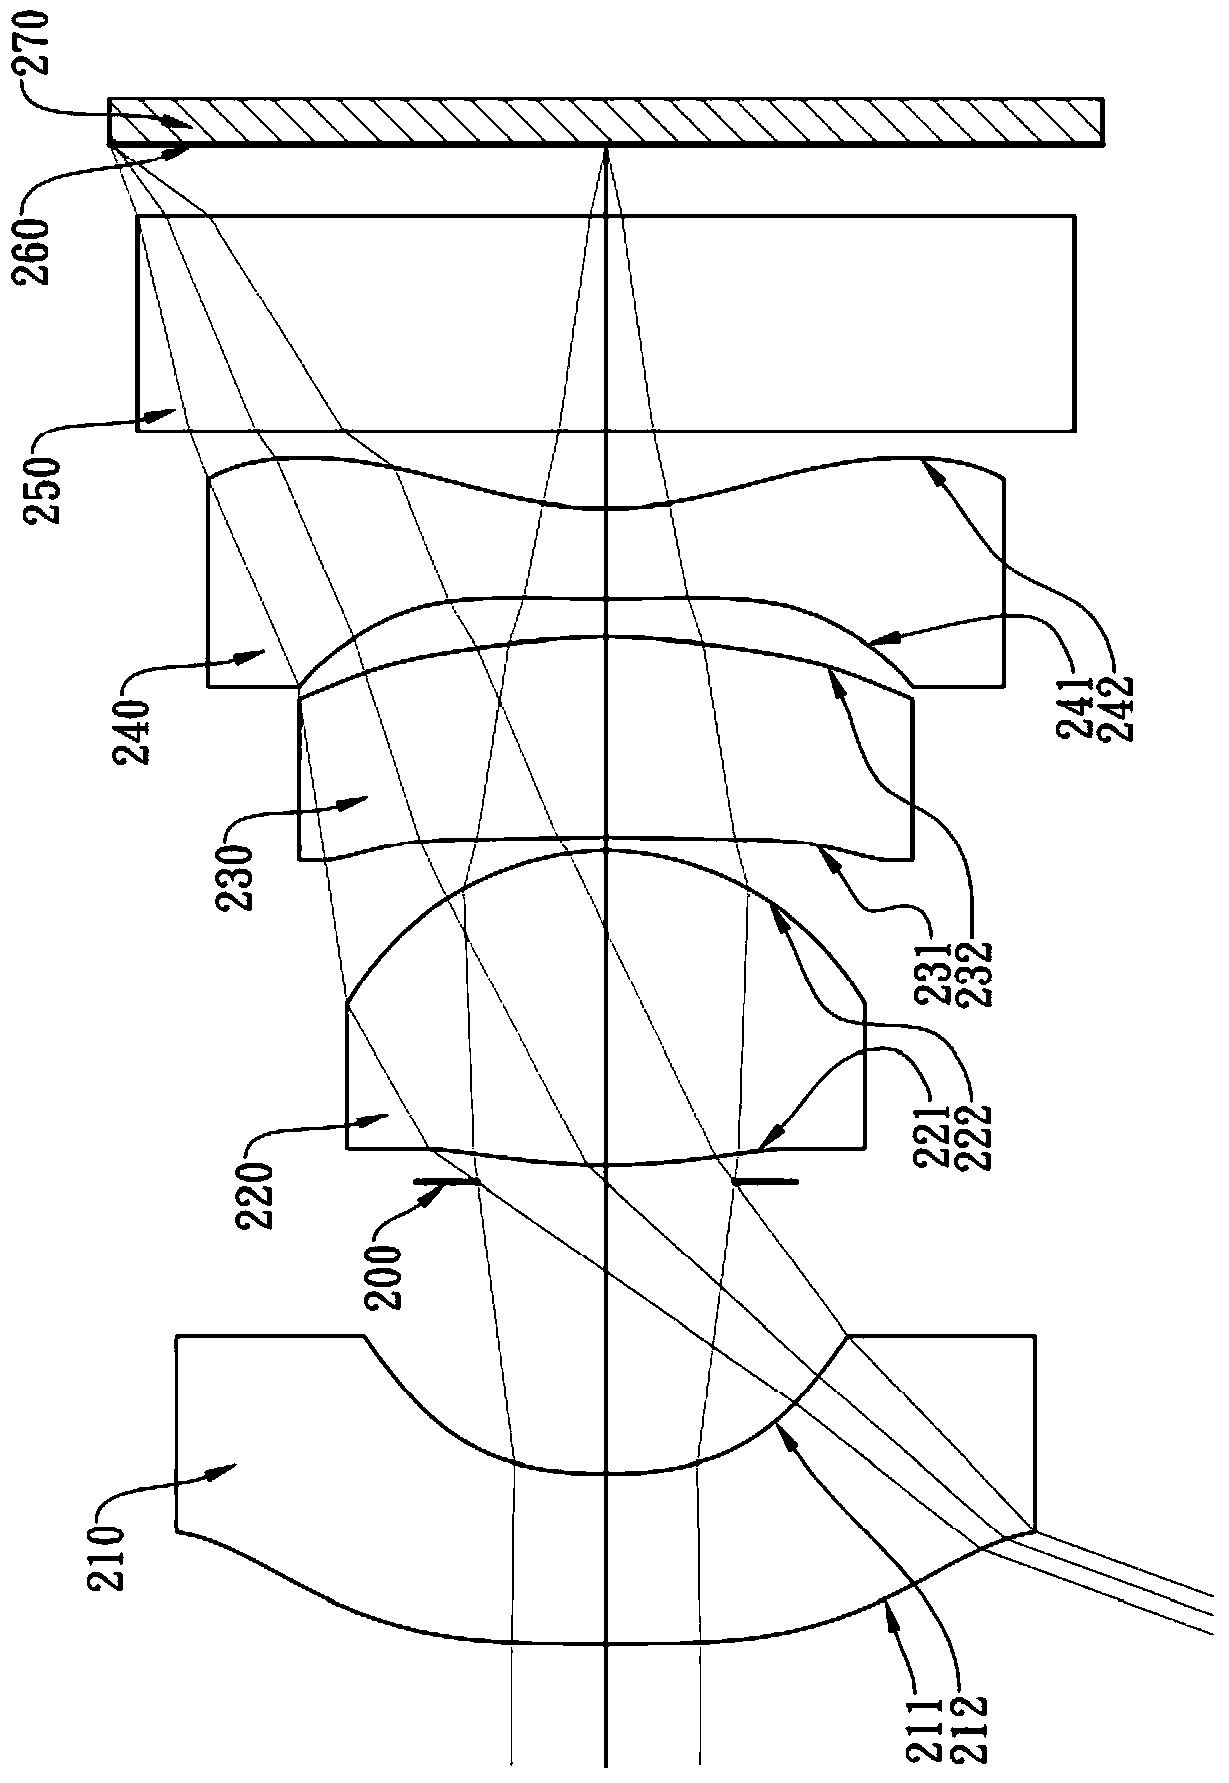 Optical system mirror group, imaging device and electronic device